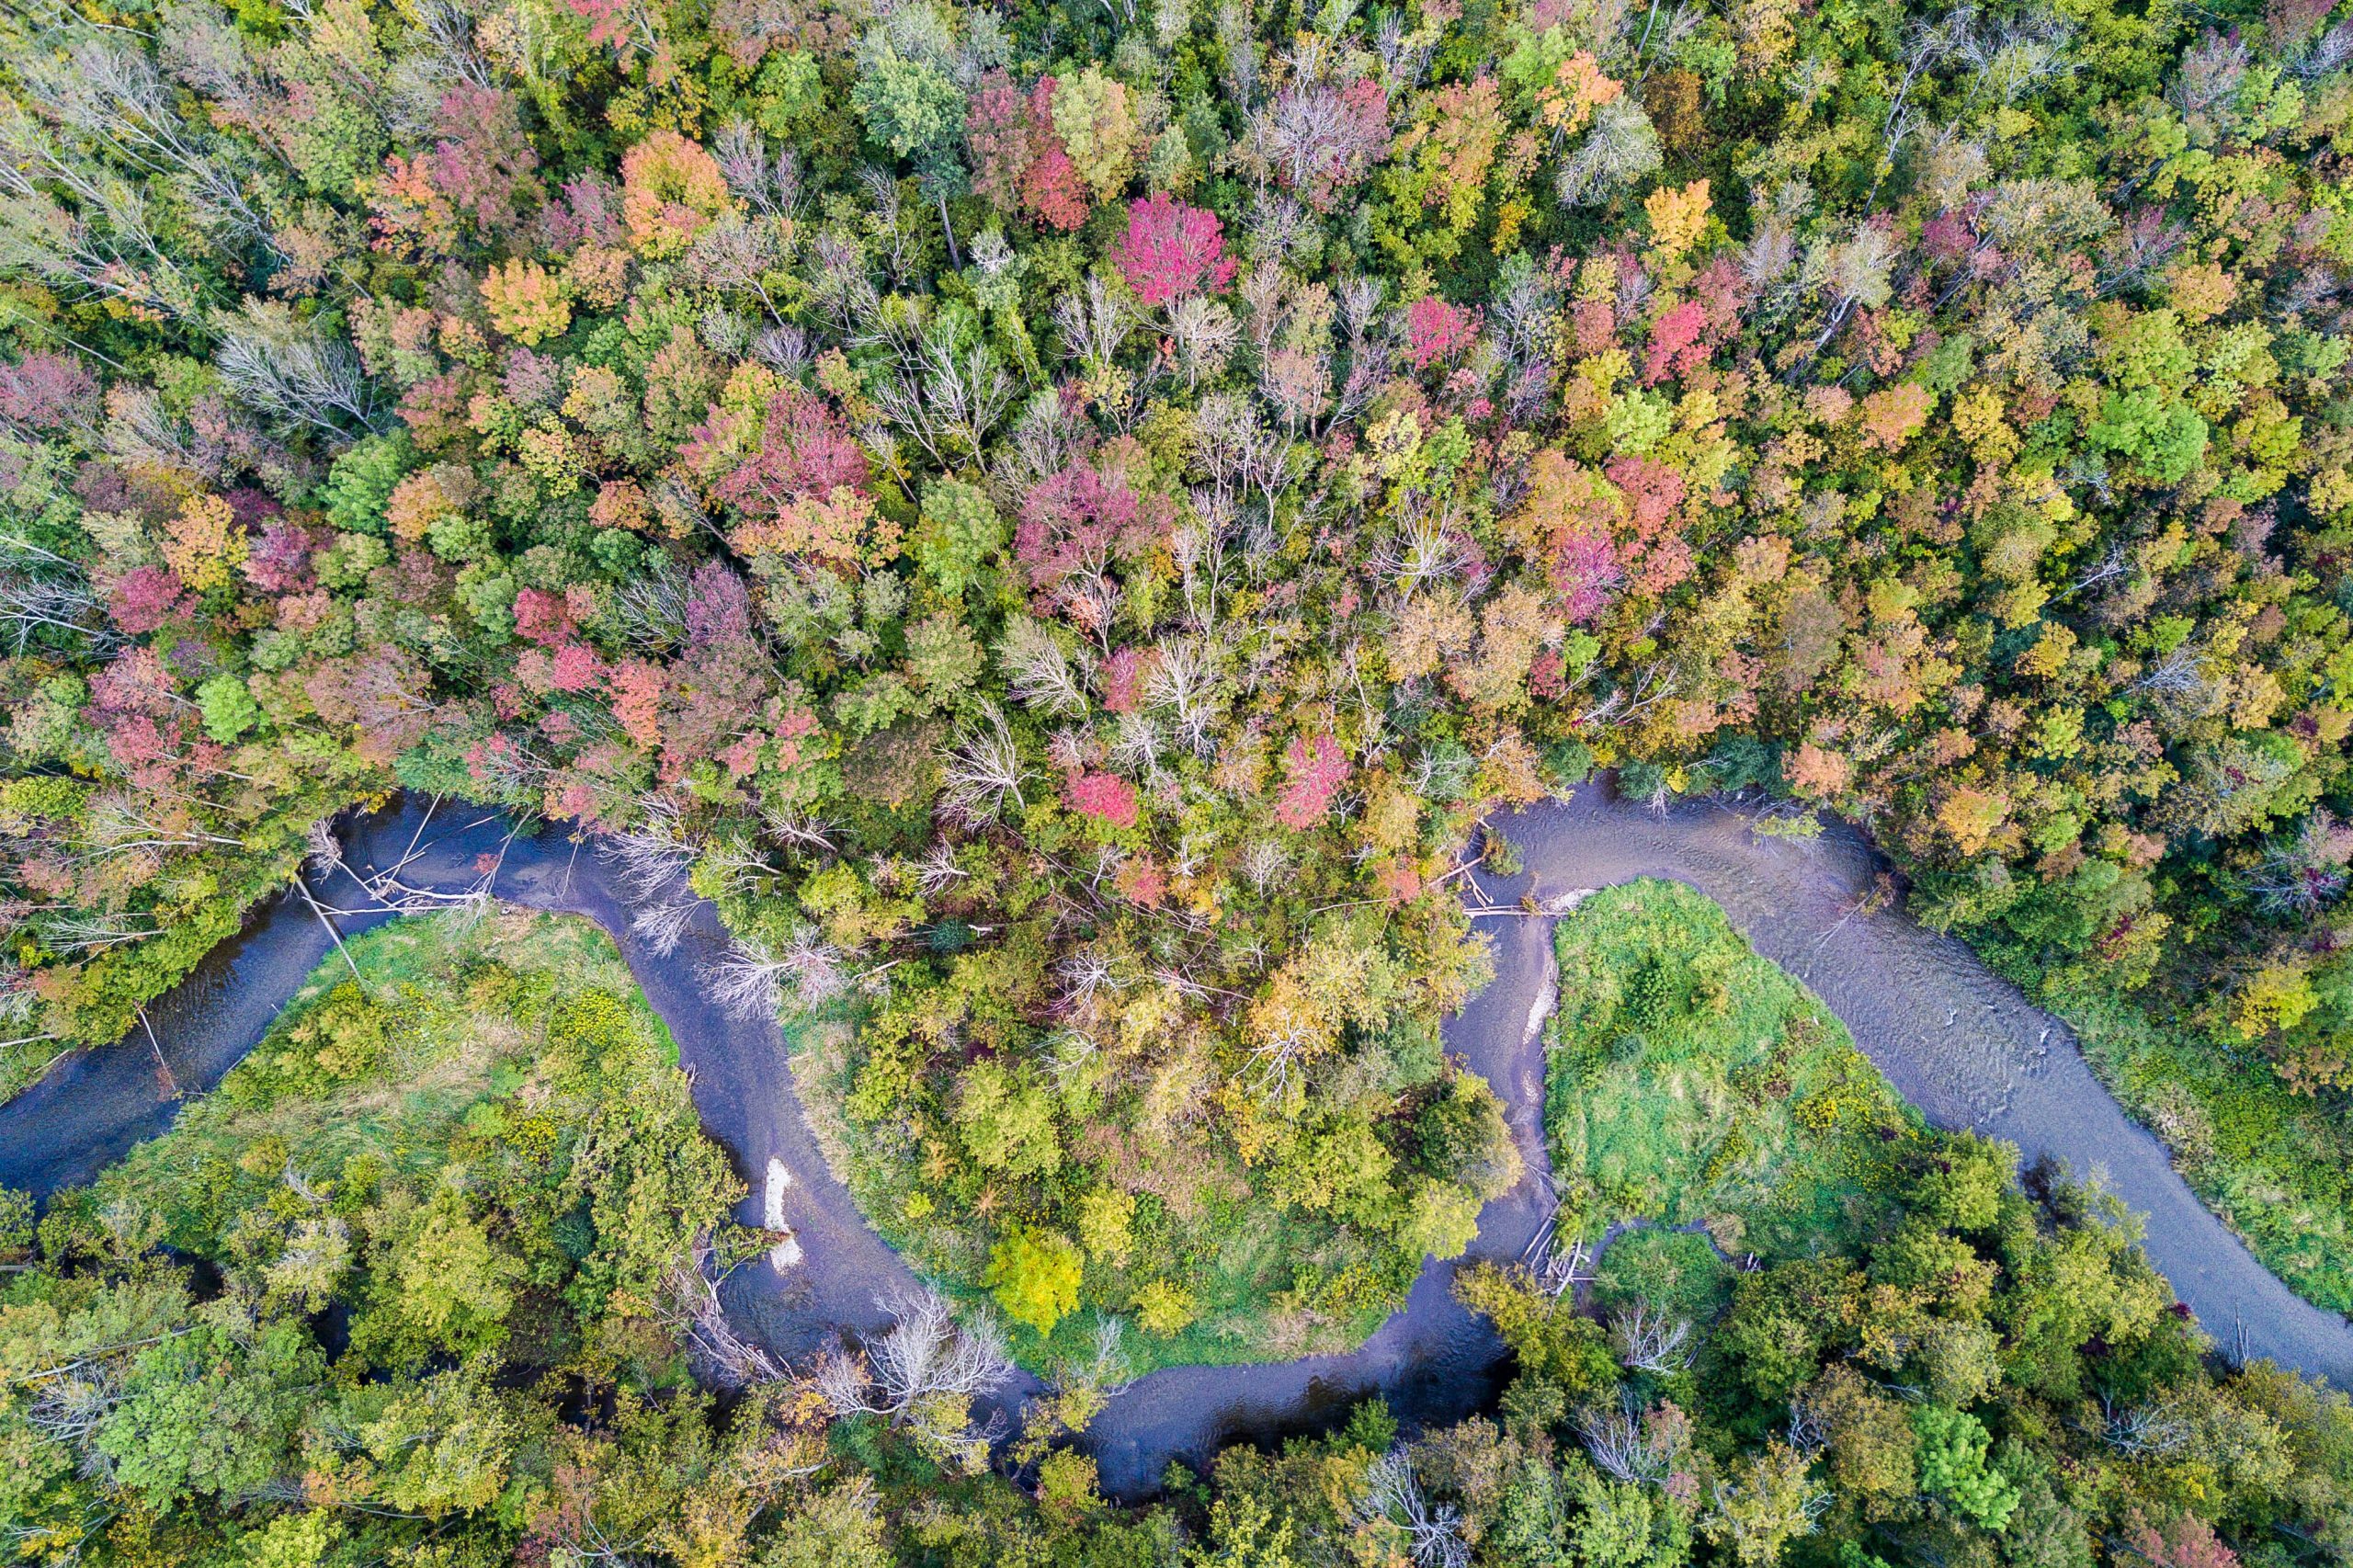 An arial view of a river winding through a forest